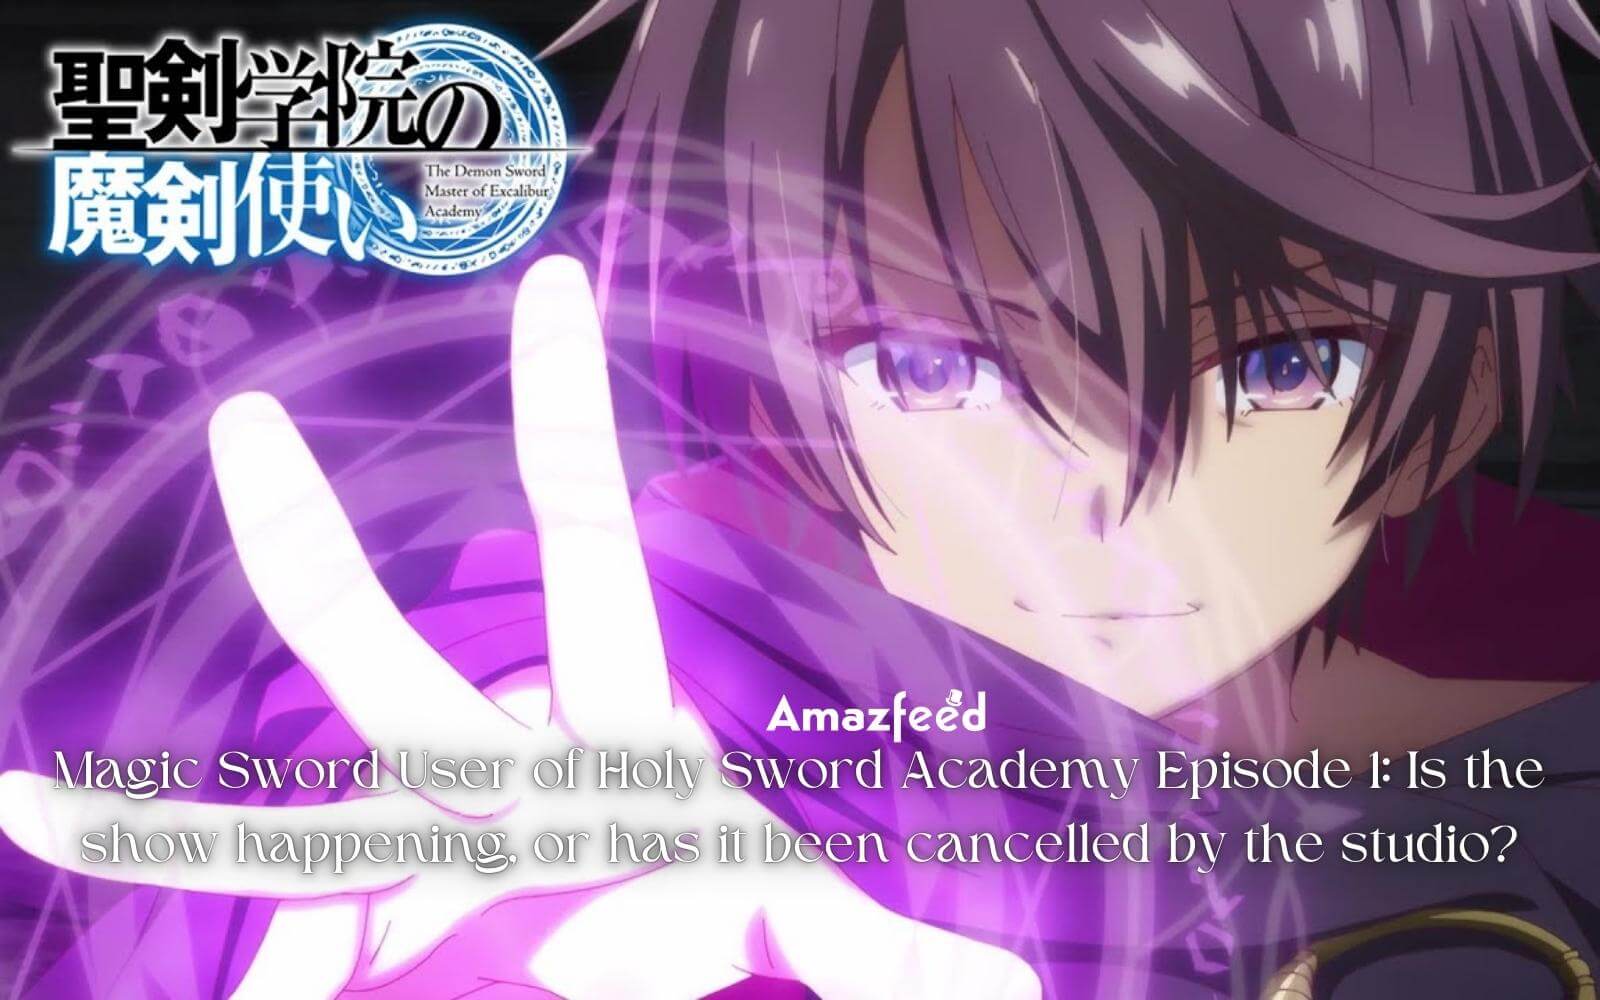 Magic Sword User of Holy Sword Academy Episode 1 Is the show happening, or has it been cancelled by the studio